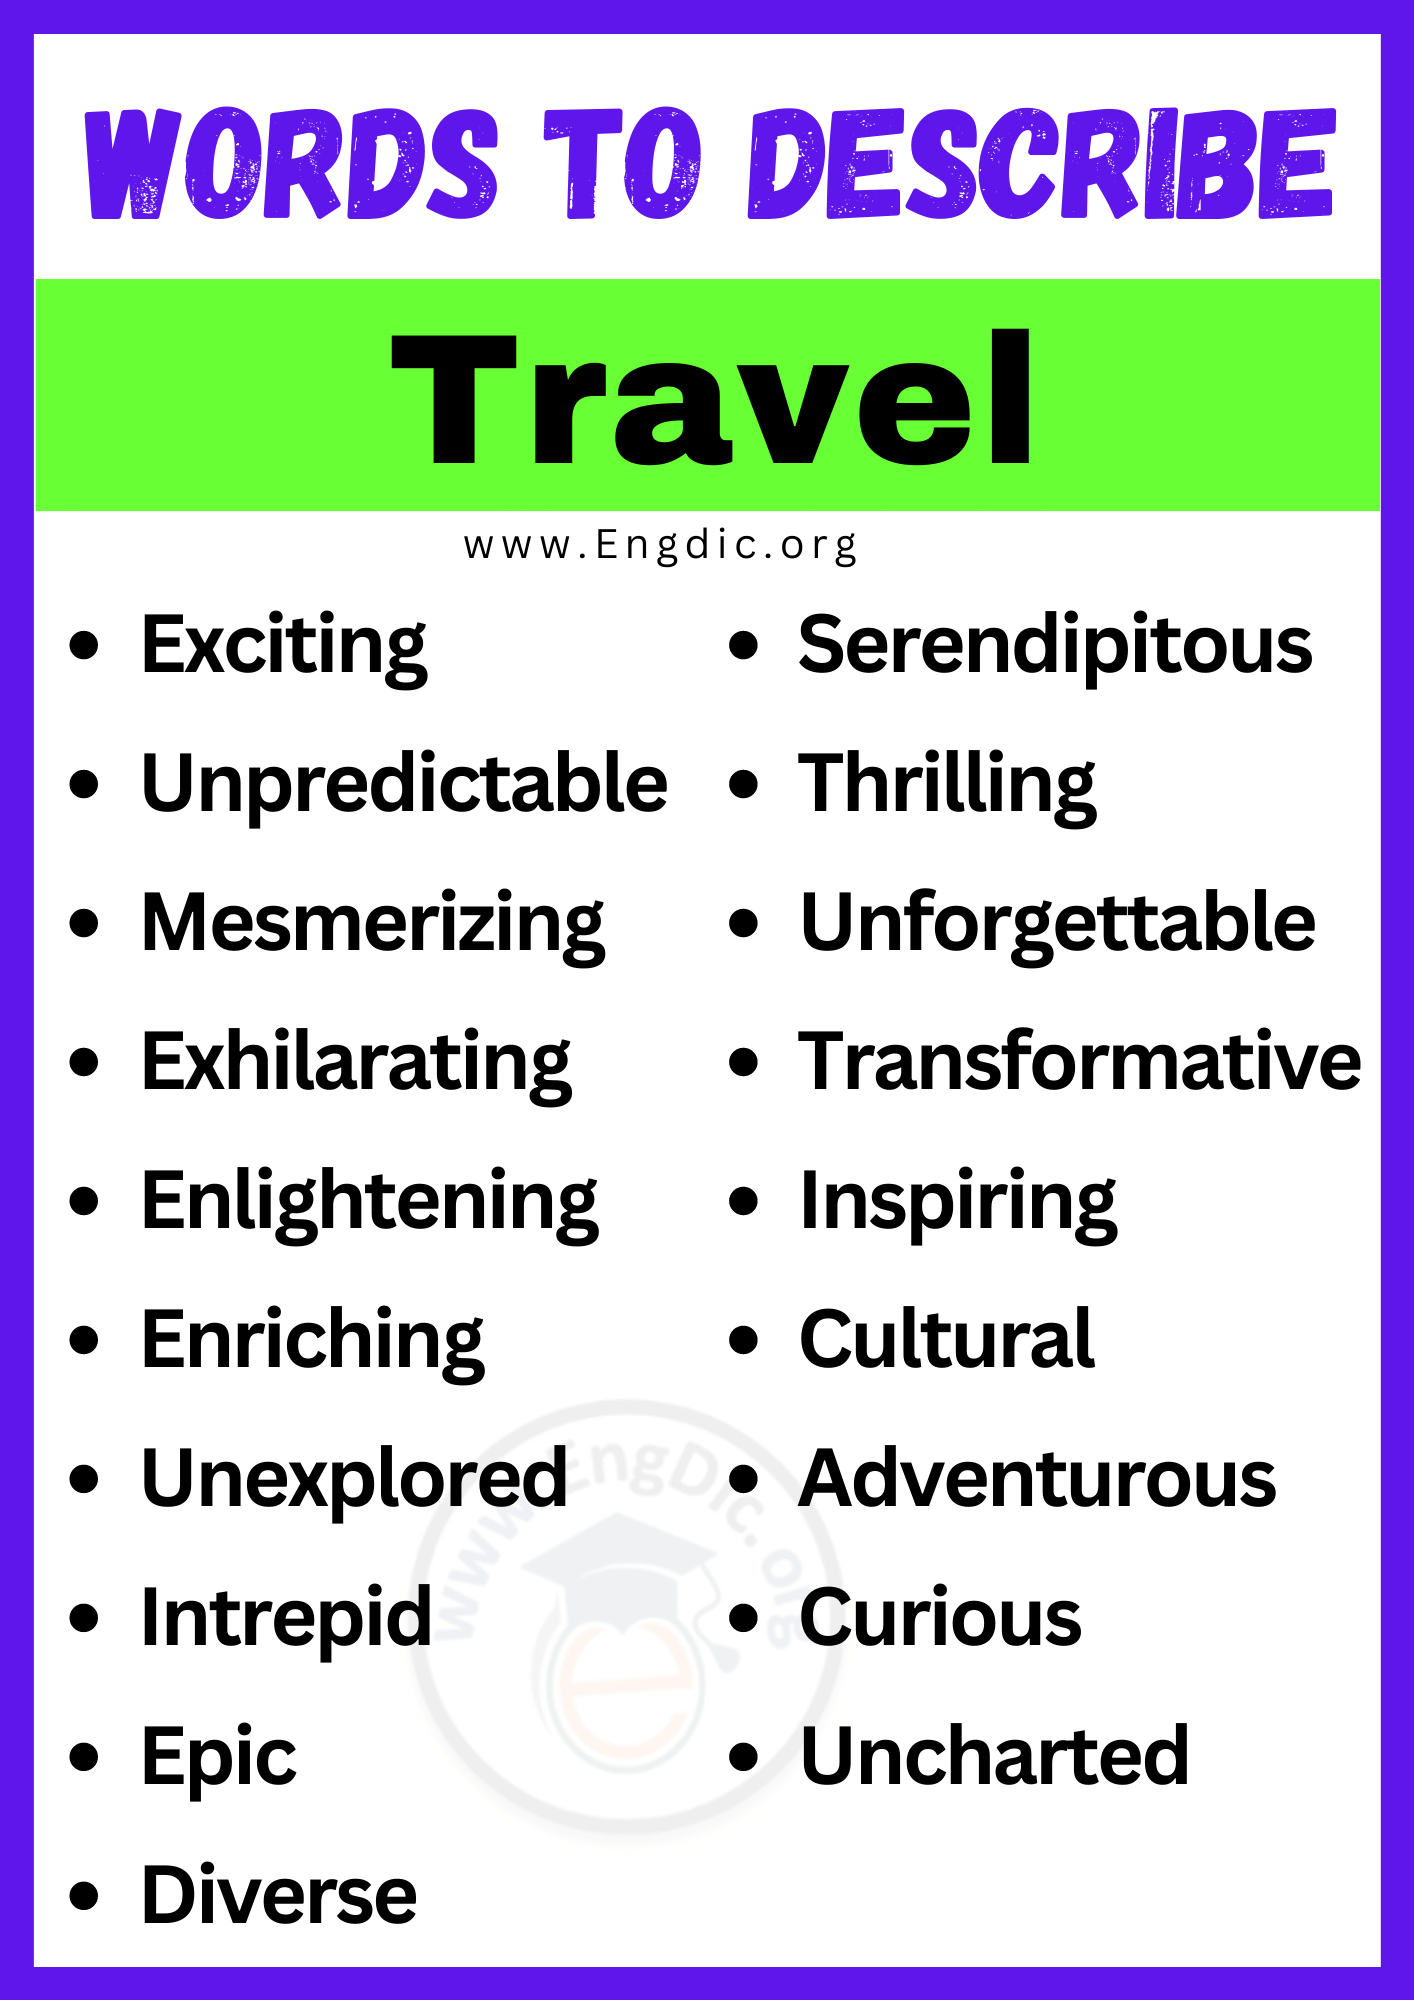 trip is adjective